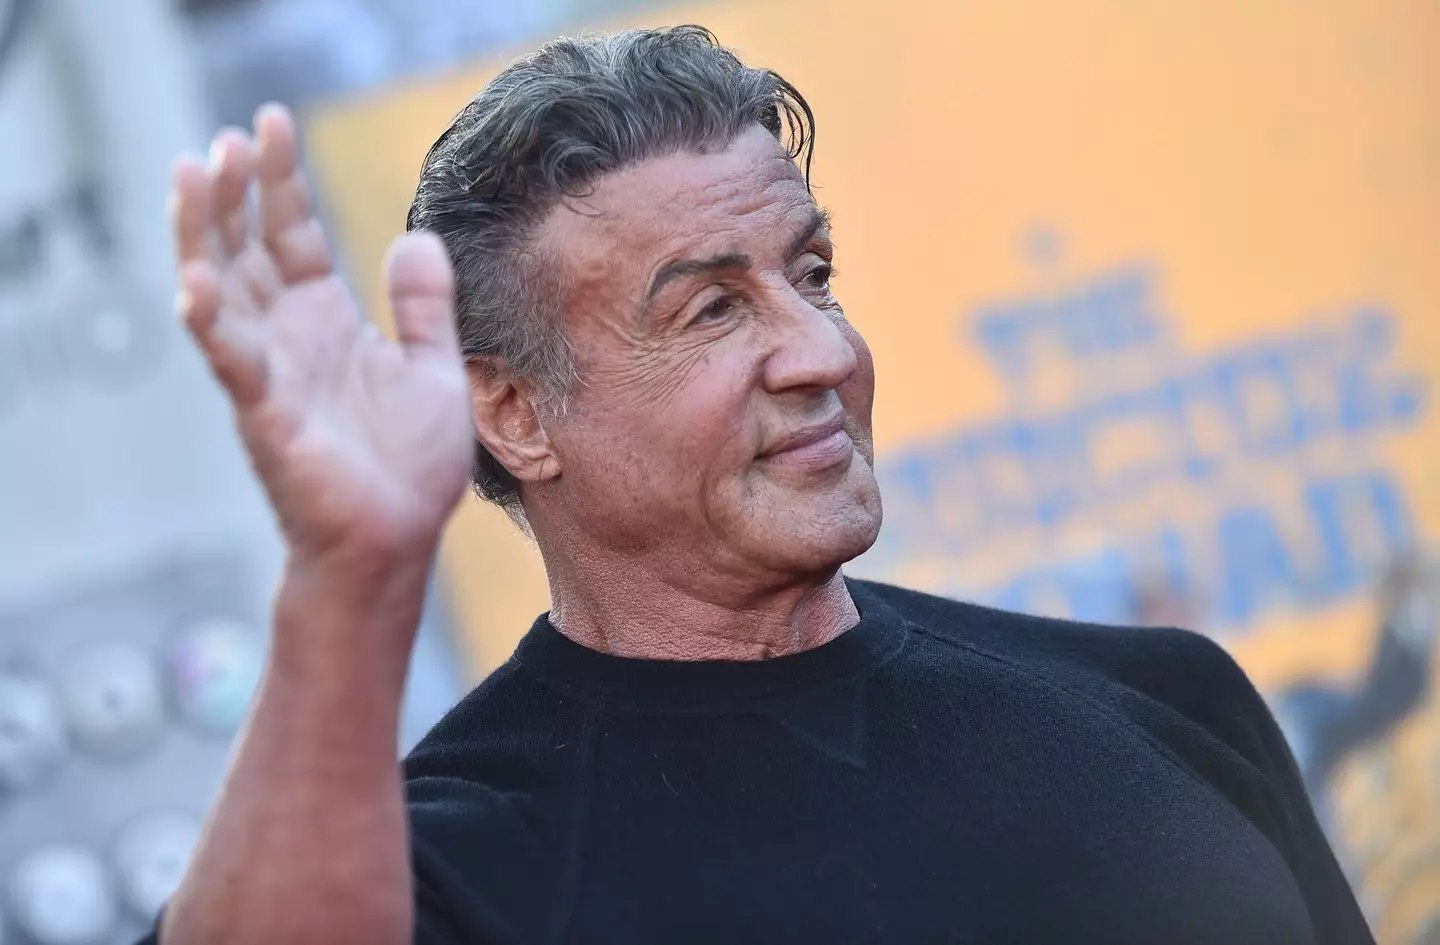 Sylvester Stallone intimidates the boys his daughters bring home.